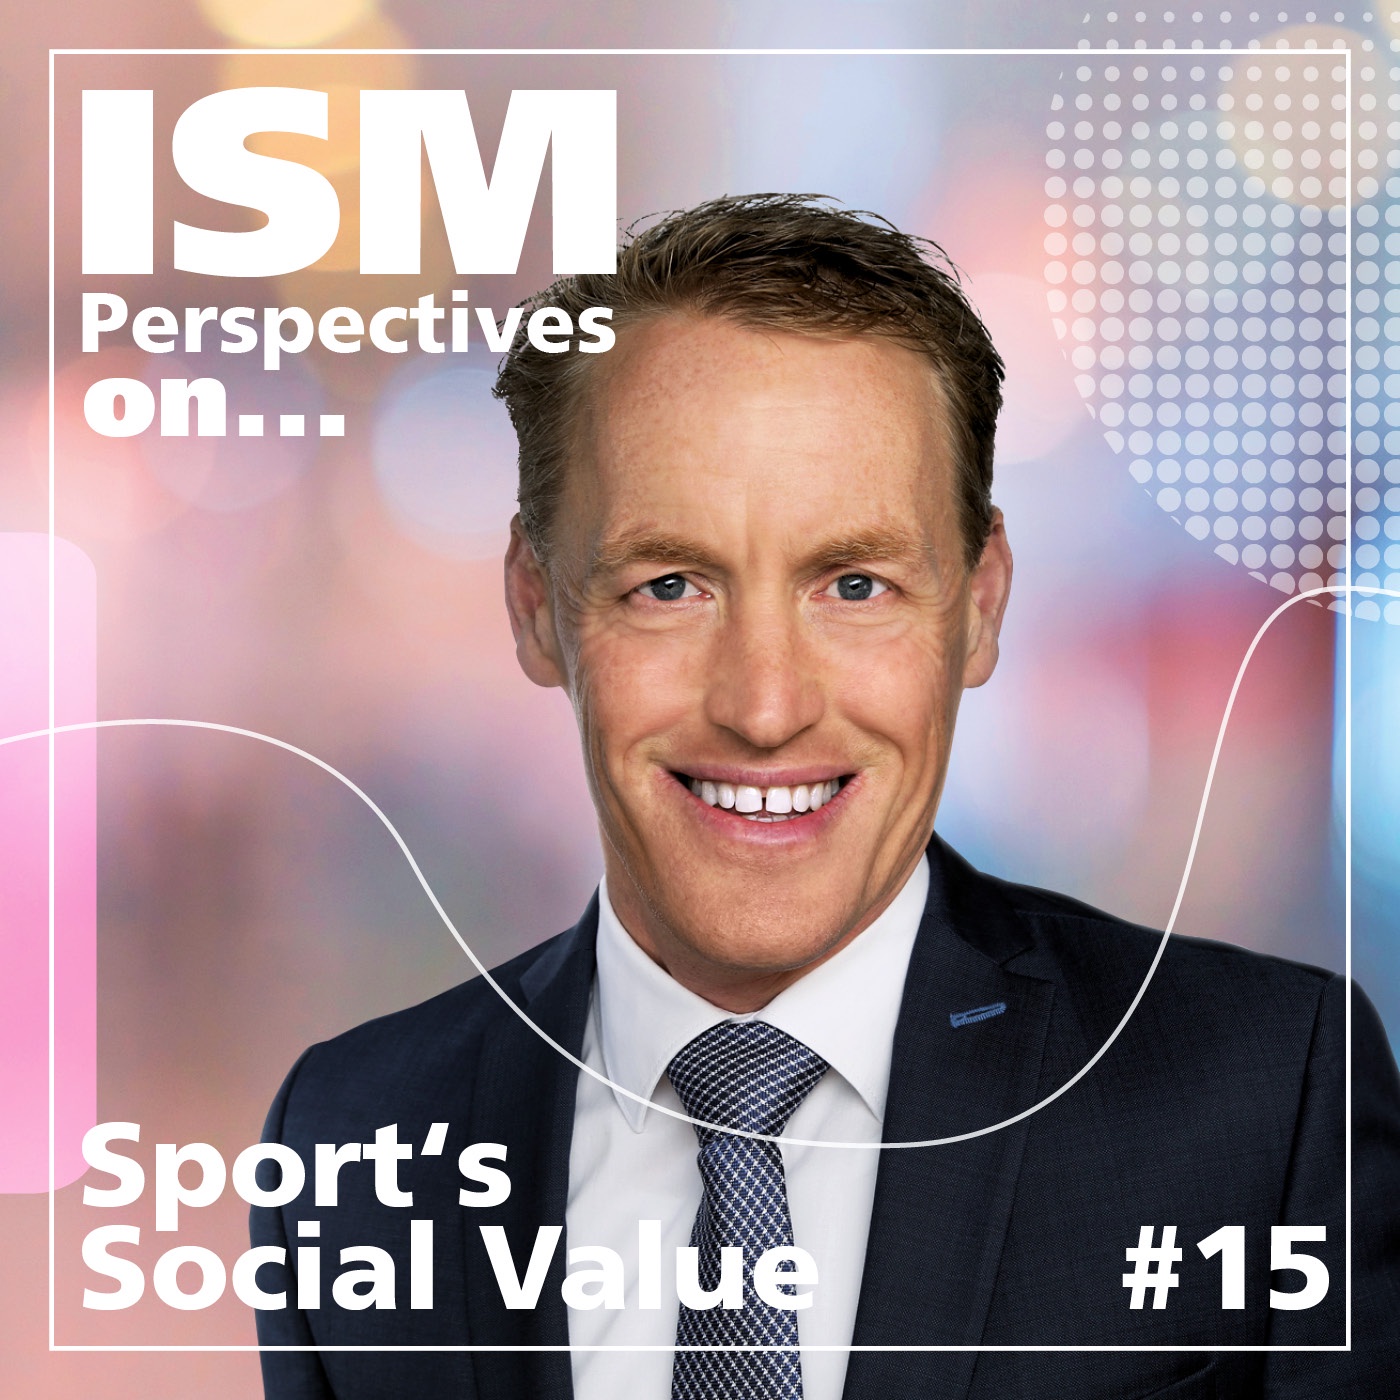 Perspectives on: Sport's Social Value